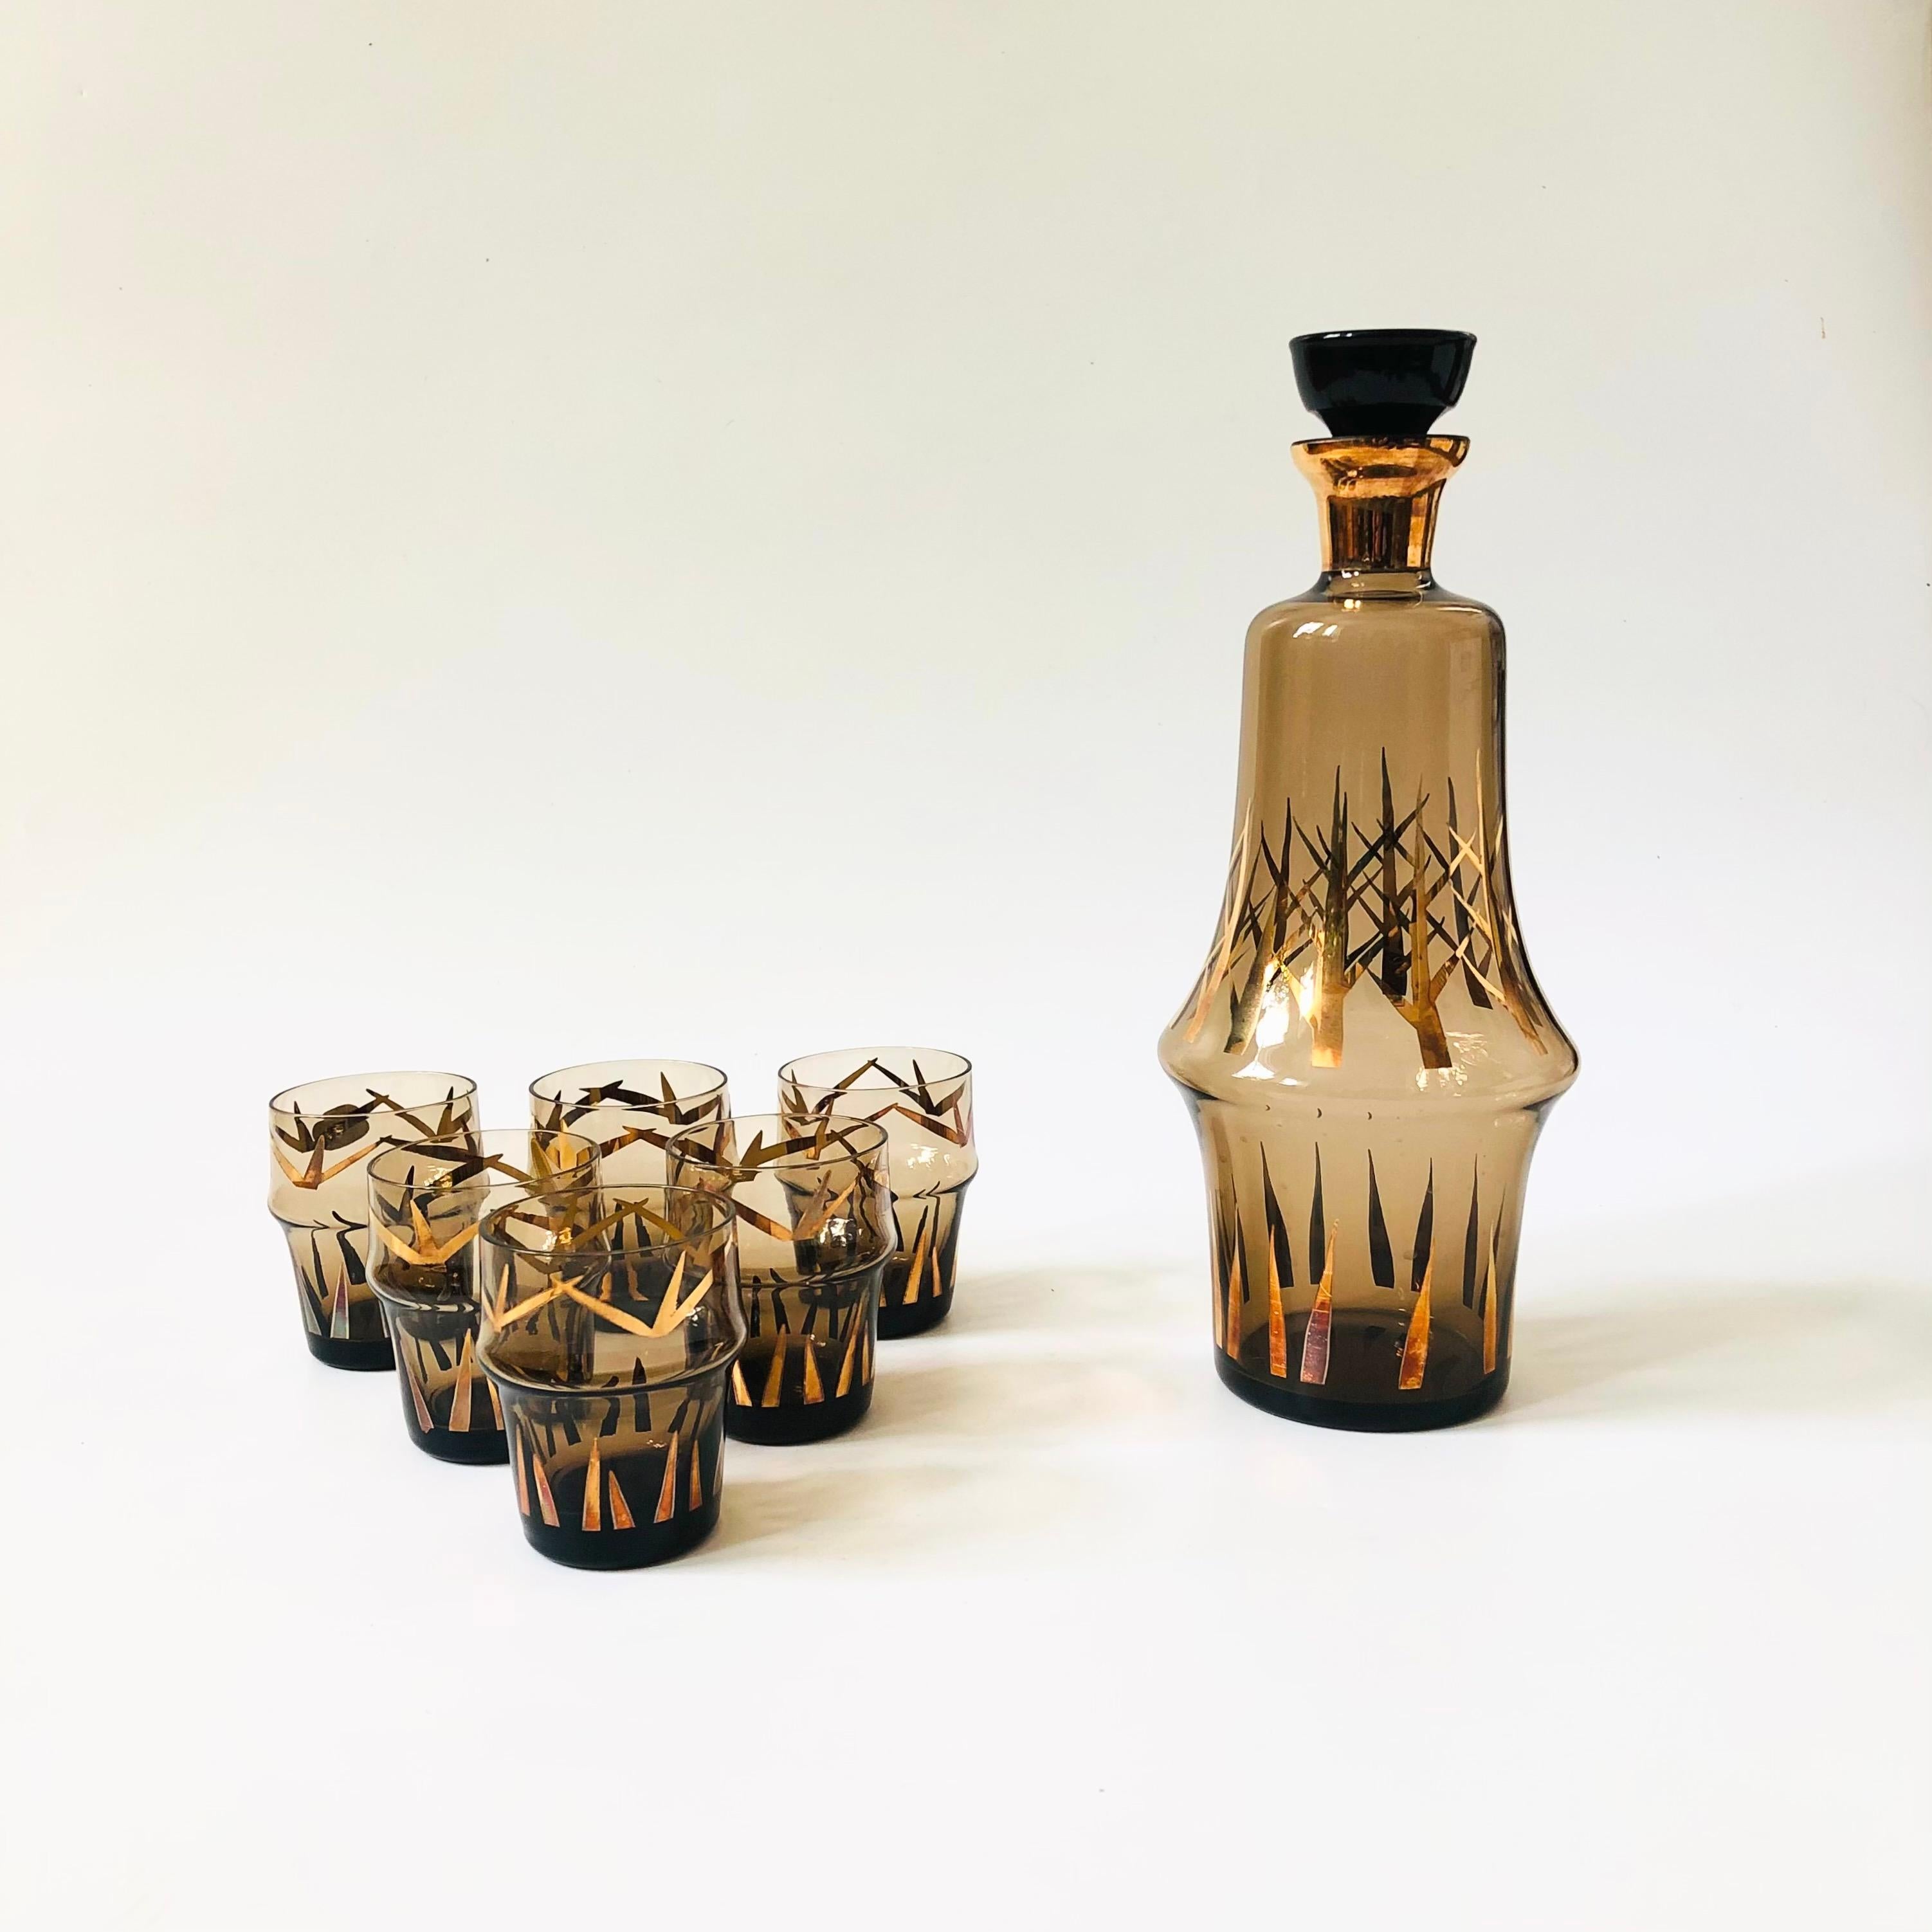 A vintage Bohemian crystal decanter set. Includes 1 large decanter with a stopper and 6 cordials. Each piece has a lovely smokey gray color to the glass and is decorated in metallic gold. A couple of the original stickers are still attached, made in